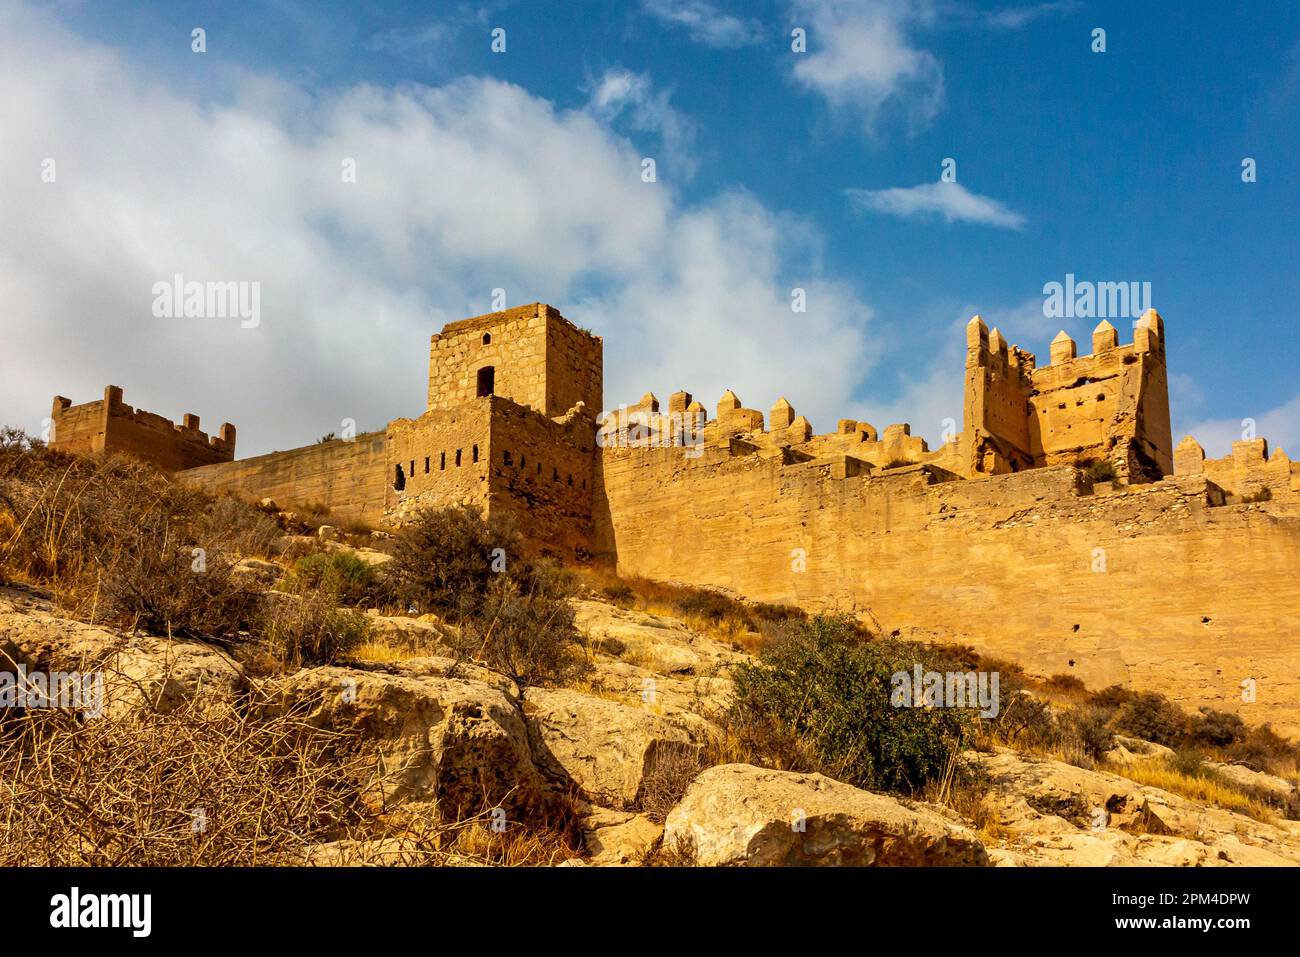 The Alcazaba of Almeria a 10th century fortress built during the Muslim period of rule in Andalusia southern Spain. Stock Photo